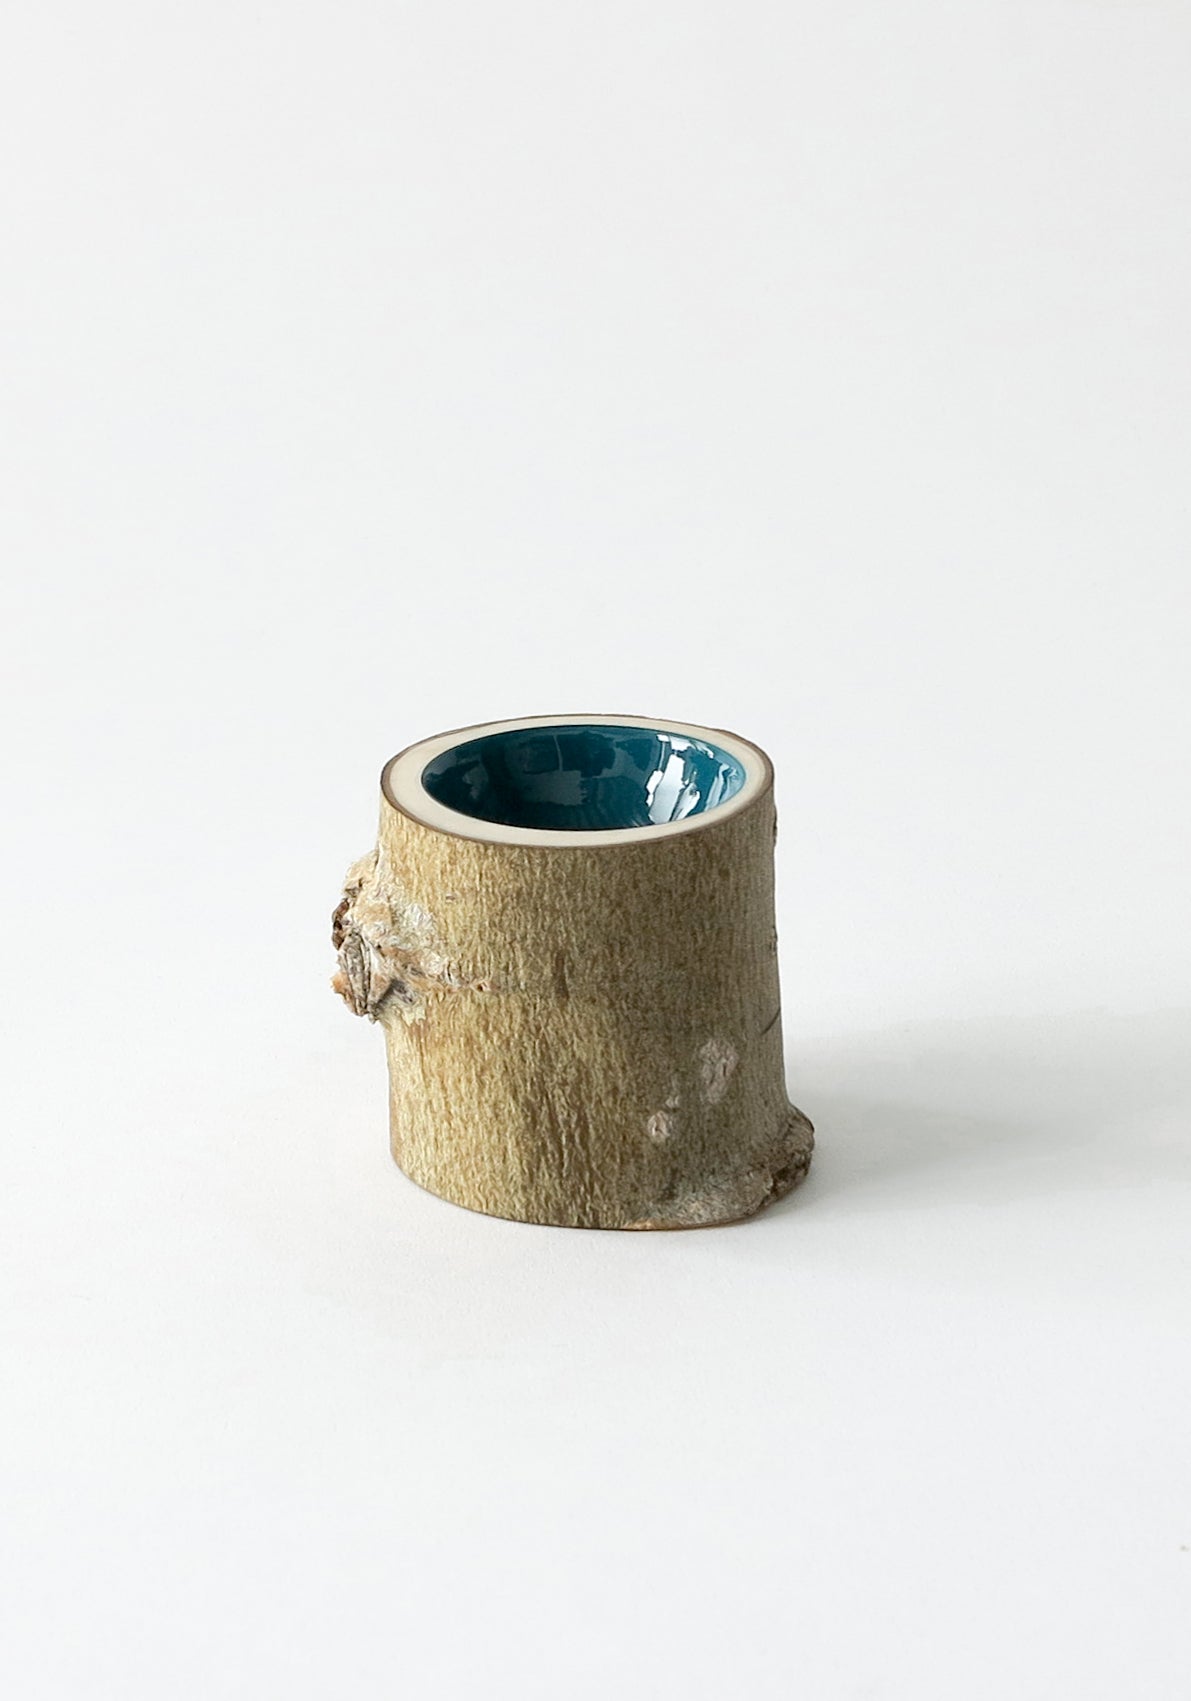 Extra Small wooden bowl with rough bark, glossy interior is a dark teal peacock colour.